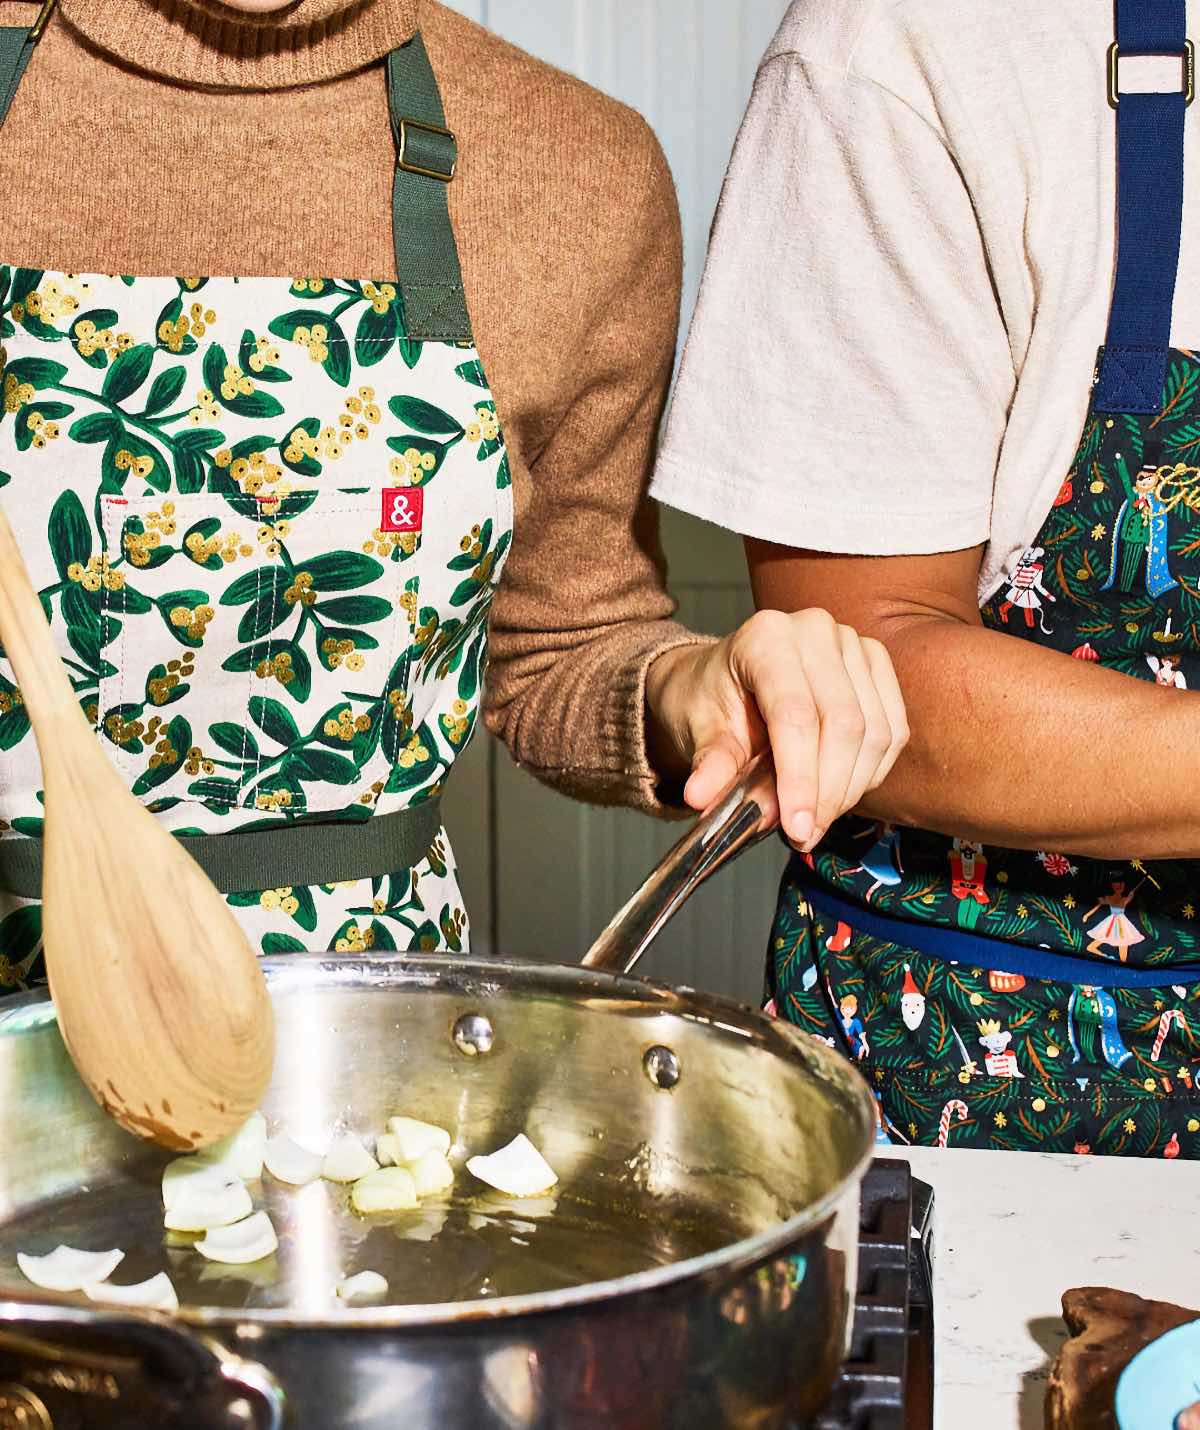 Festive holiday Hedley & Bennett aprons his and hers.